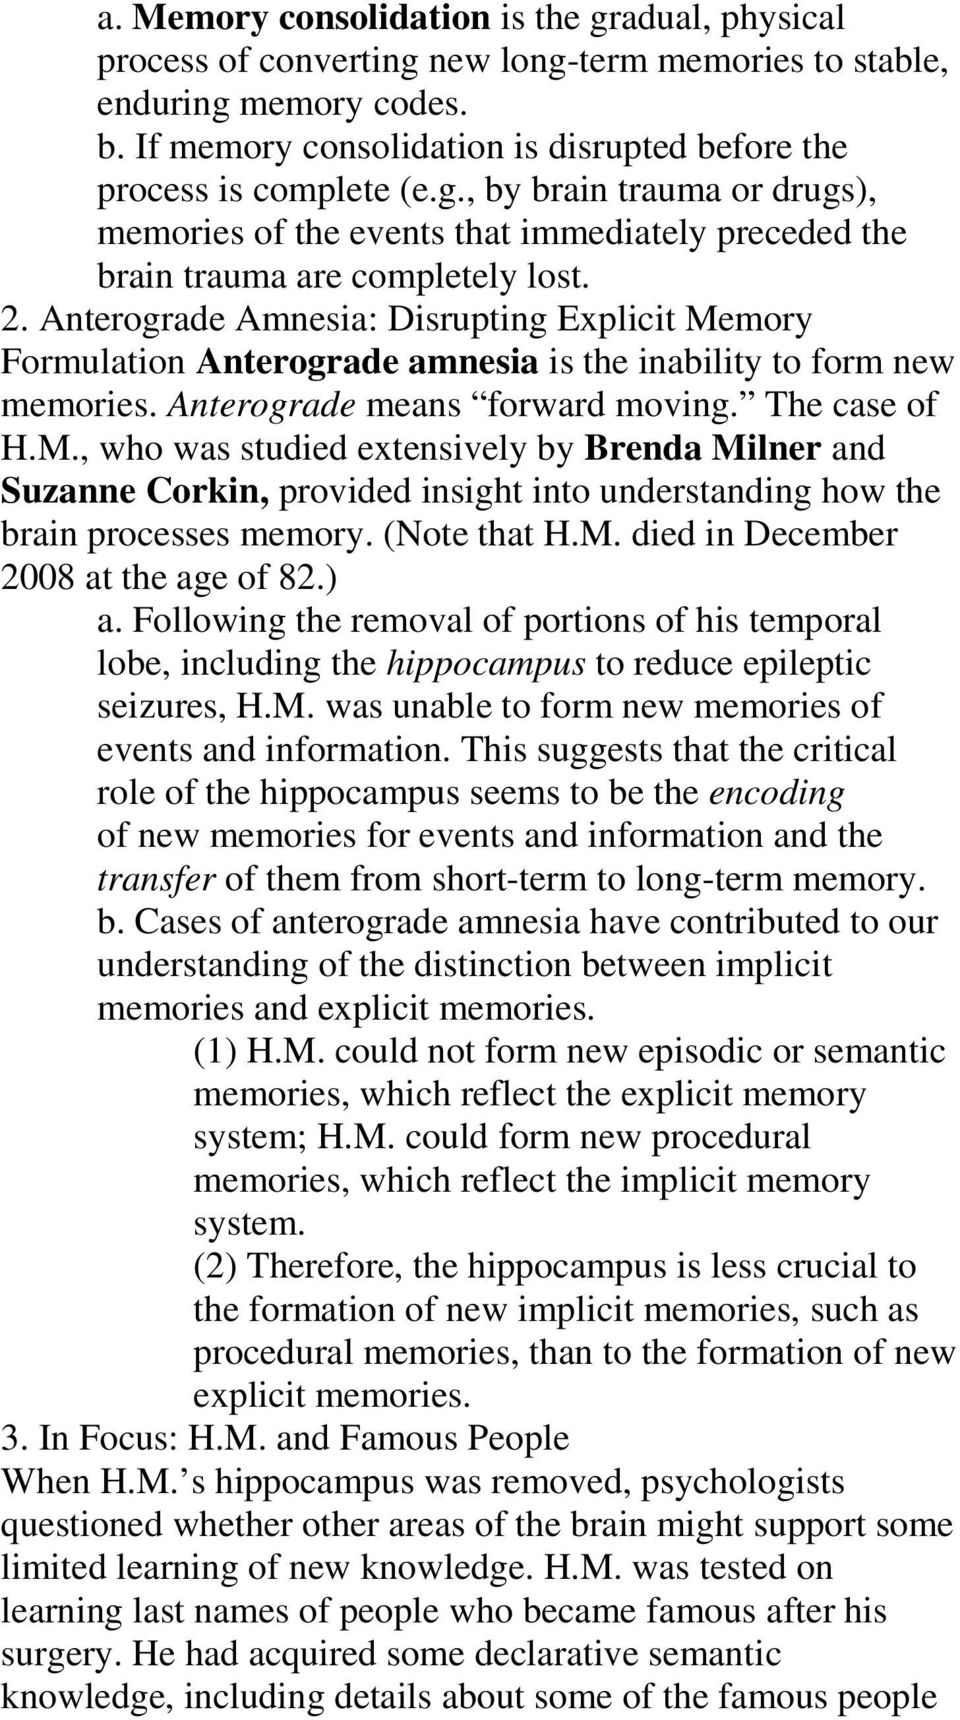 Anterograde Amnesia: Disrupting Explicit Memory Formulation Anterograde amnesia is the inability to form new memories. Anterograde means forward moving. The case of H.M., who was studied extensively by Brenda Milner and Suzanne Corkin, provided insight into understanding how the brain processes memory.